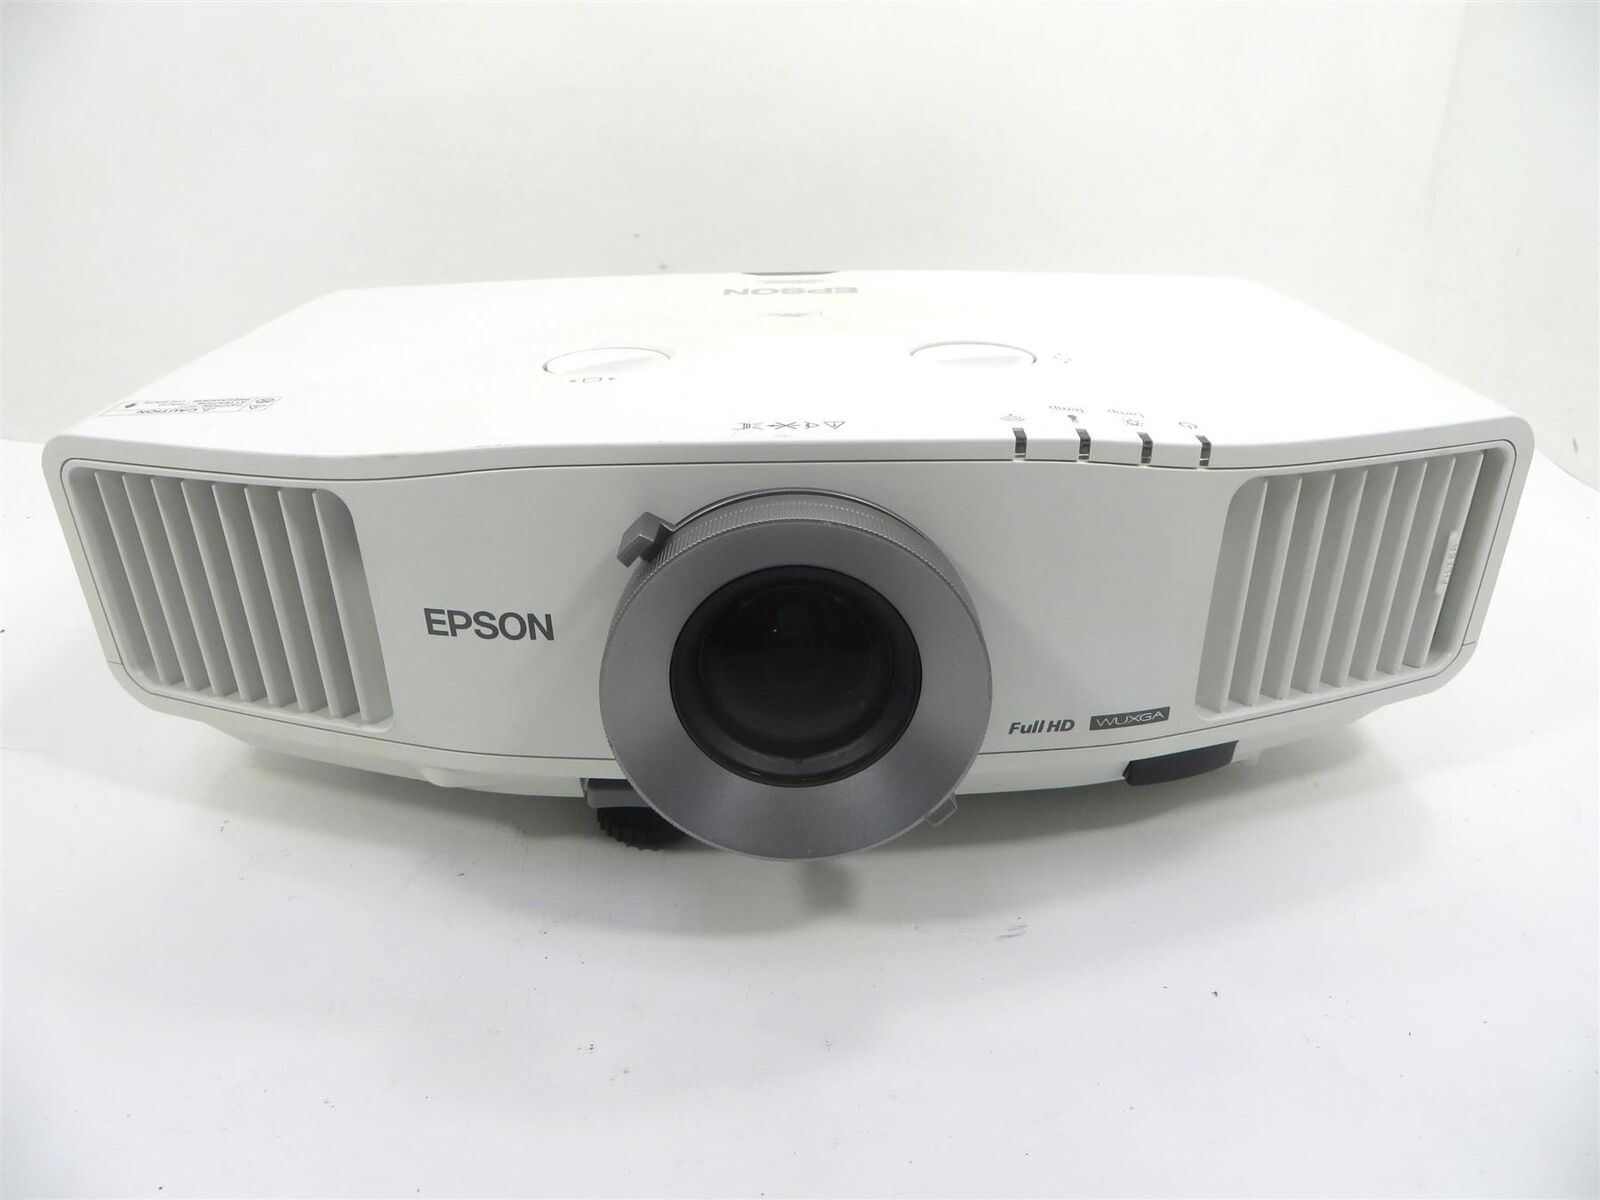 Epson PowerLite Pro G5450WU - Full HD 3LCD Projector - Lamp Runtime: 00 Hrs